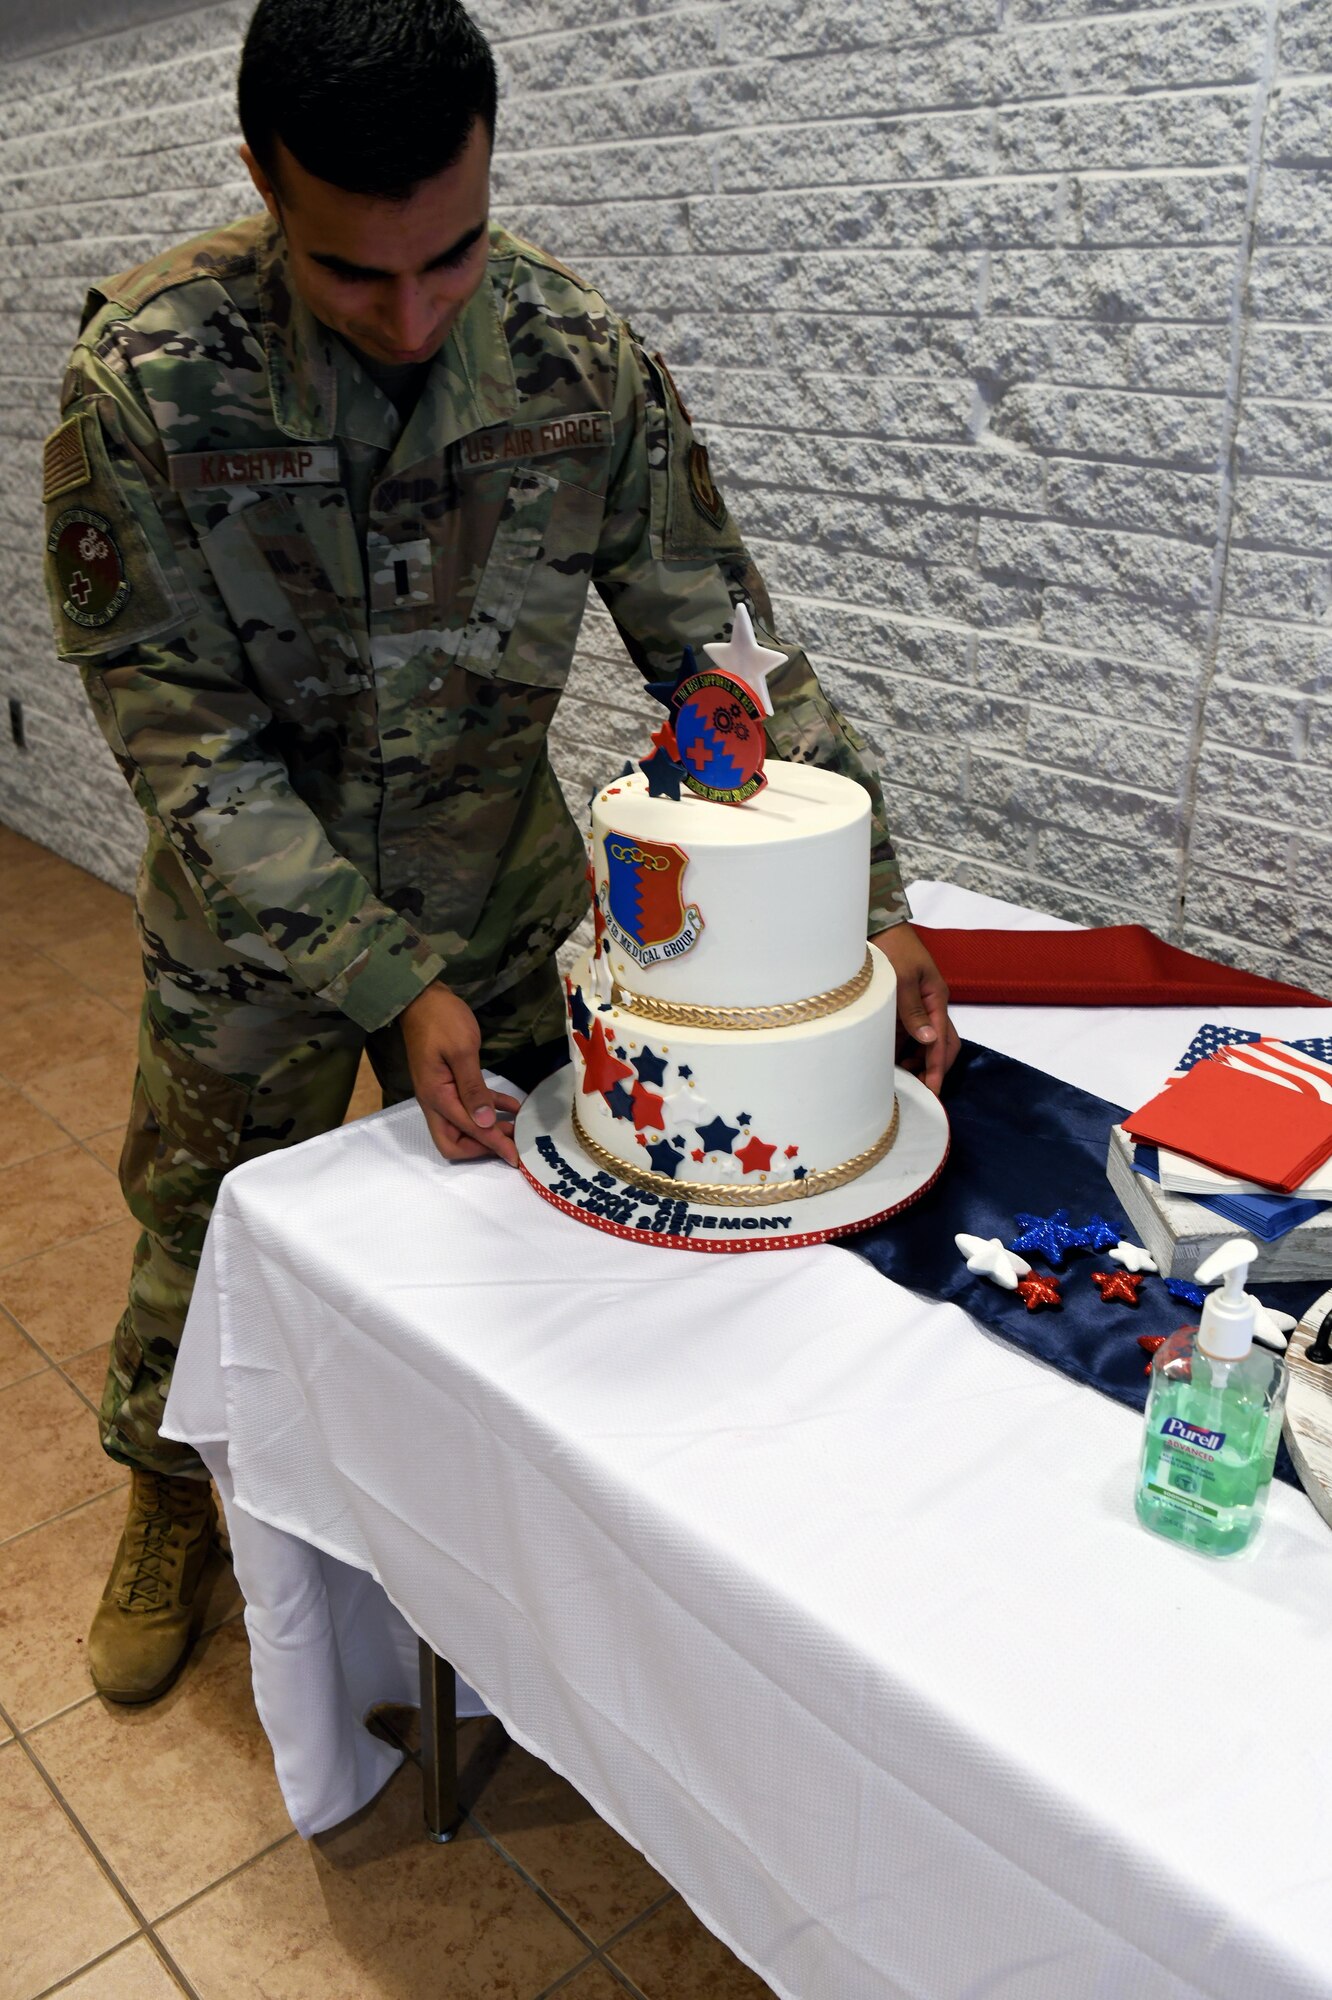 File shows Airman placing cake on table.